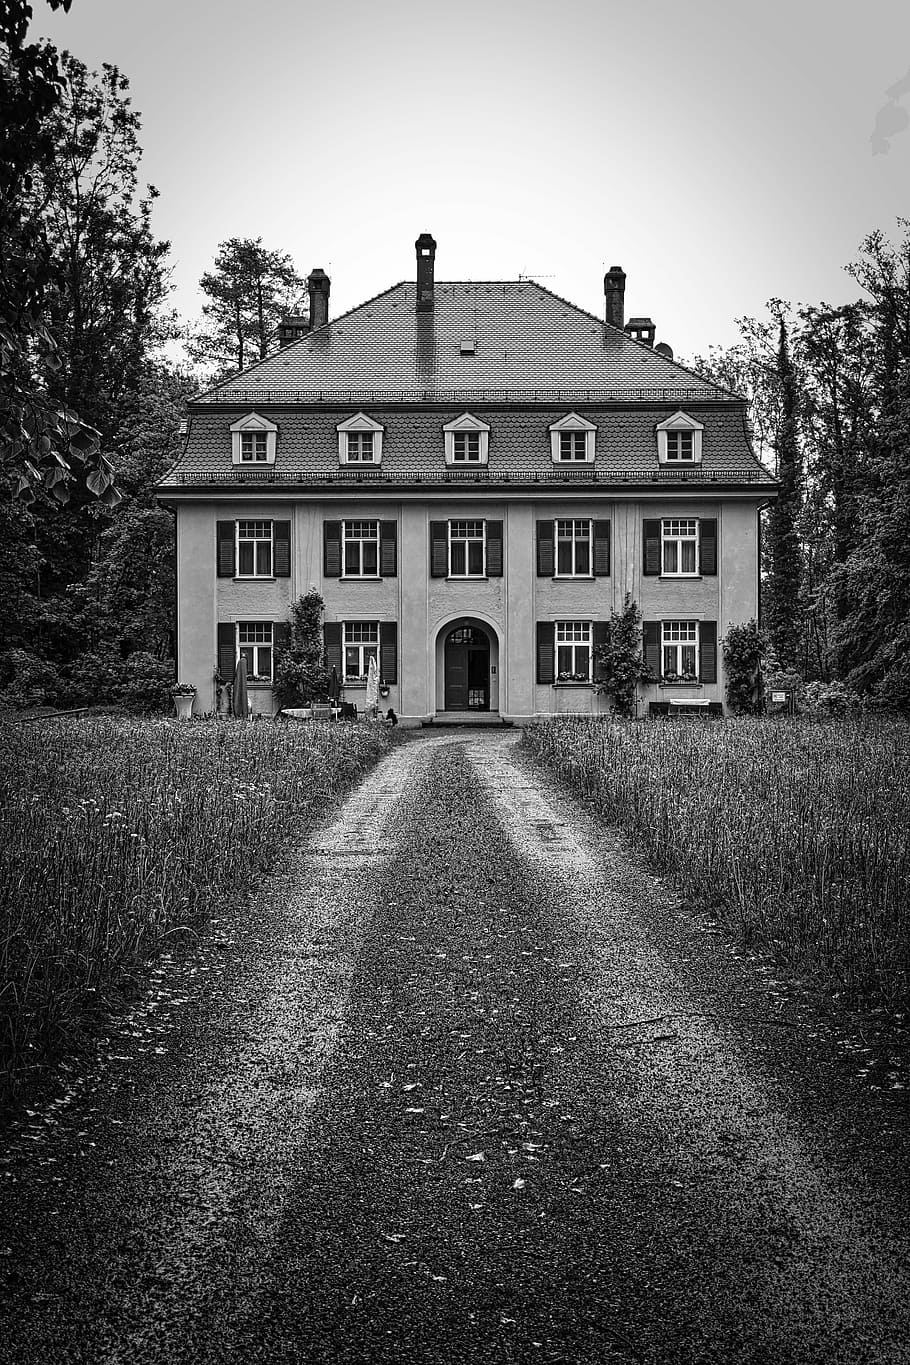 grayscale photo, house, surrounded, trees, residence, estate, perspective, driveway, front of house, exterior home